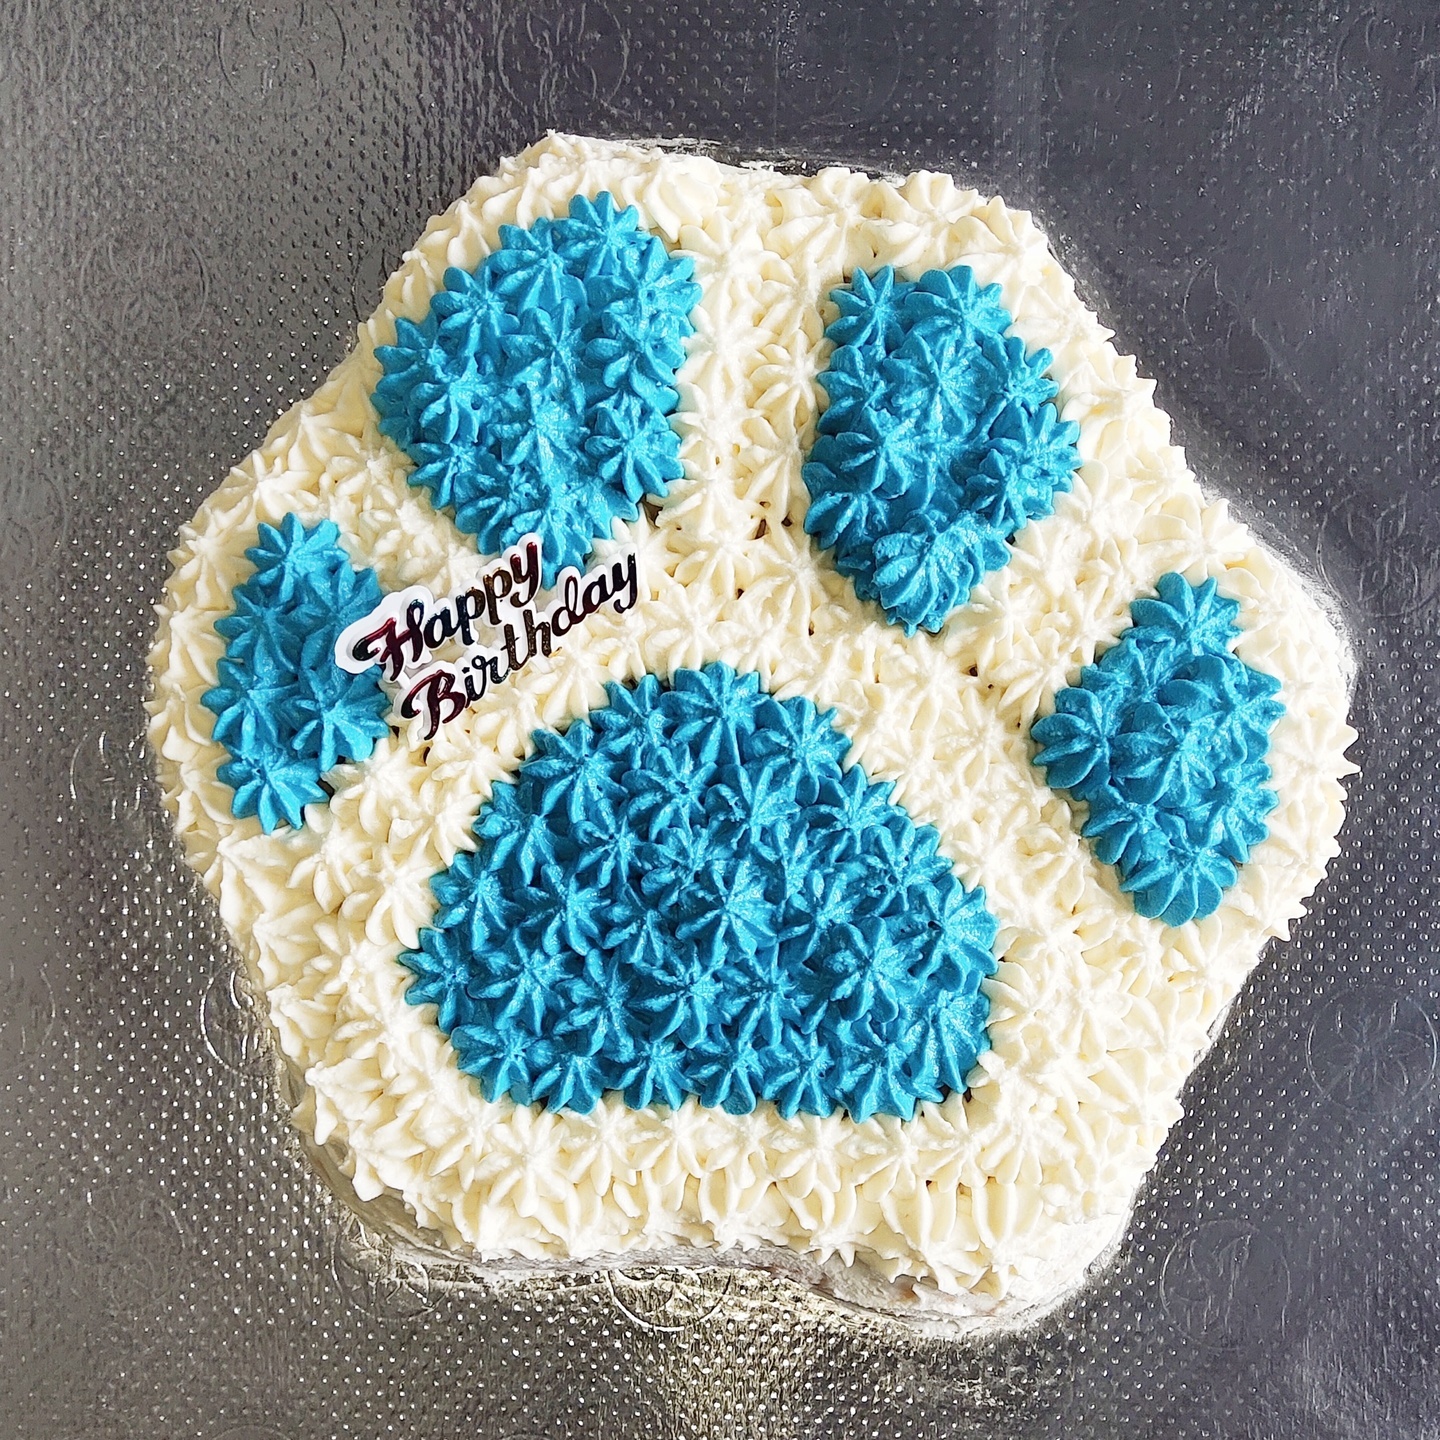 Cottage Cheese Paw Cake